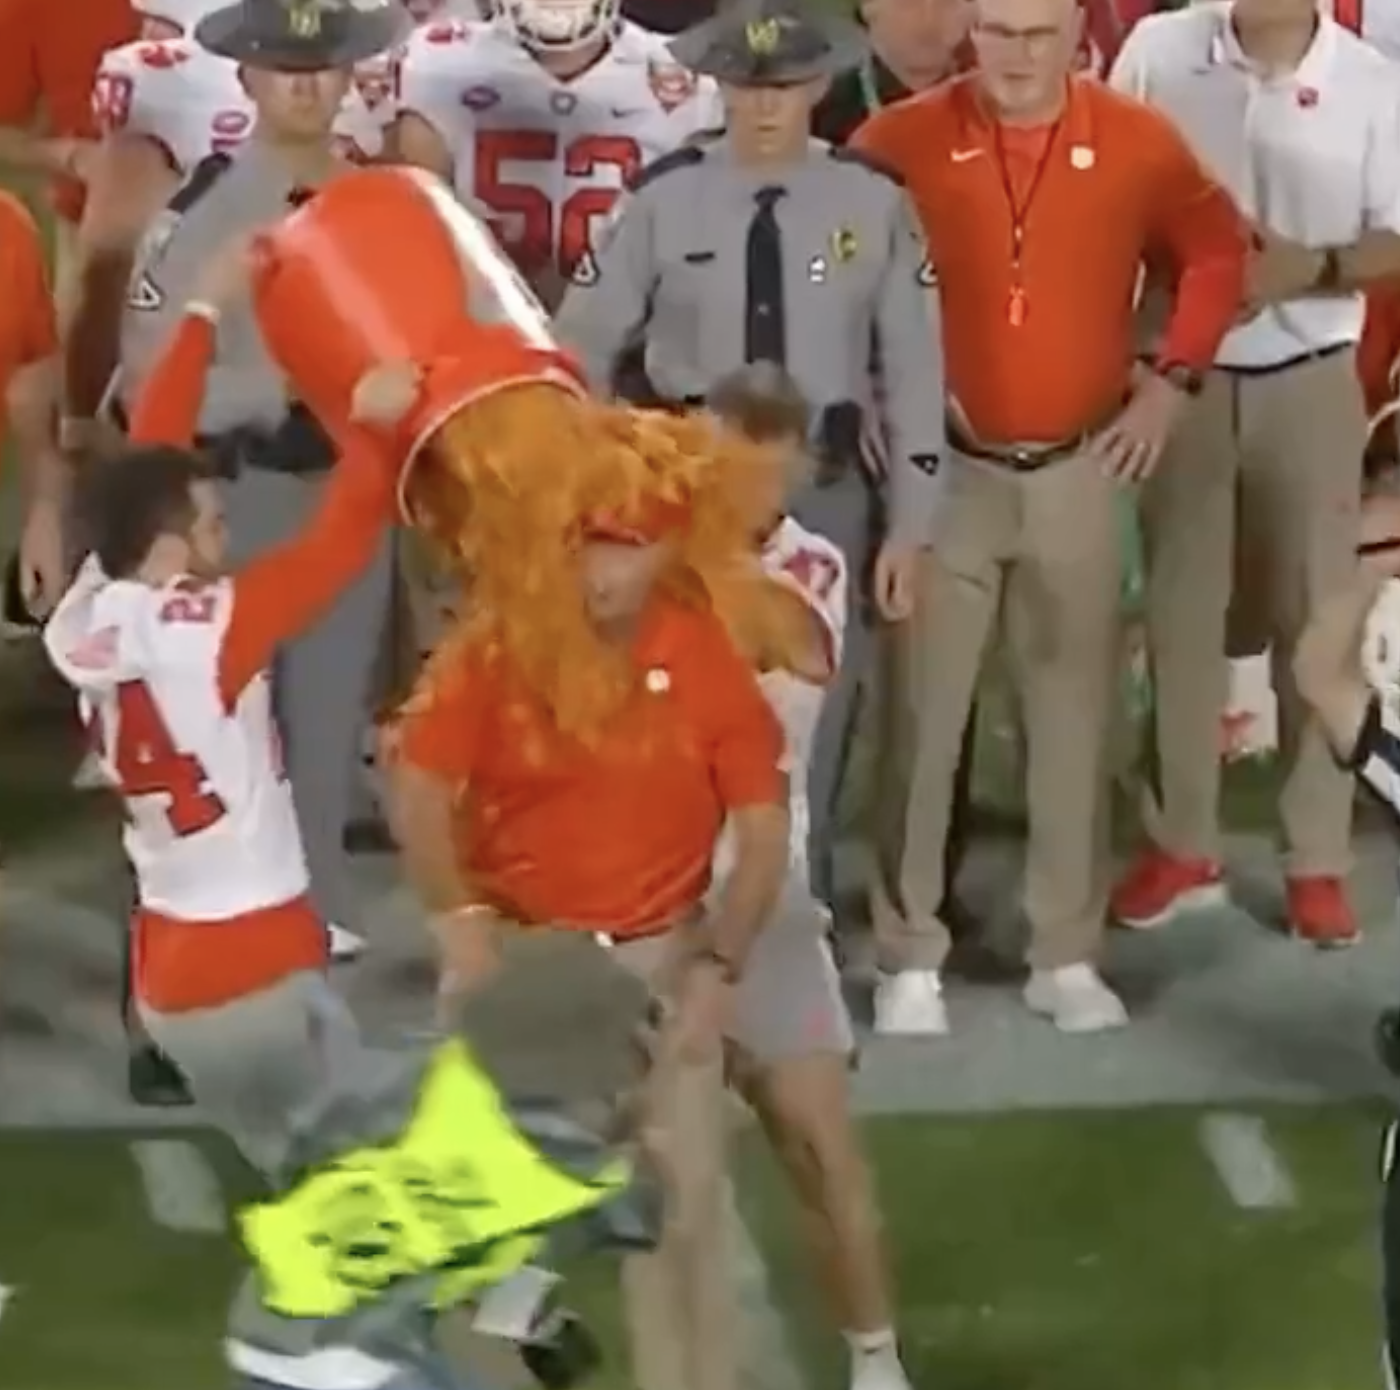 Dabo Swinney gets Cheez-Its dumped on him at the 2021 Cheez-It Bowl